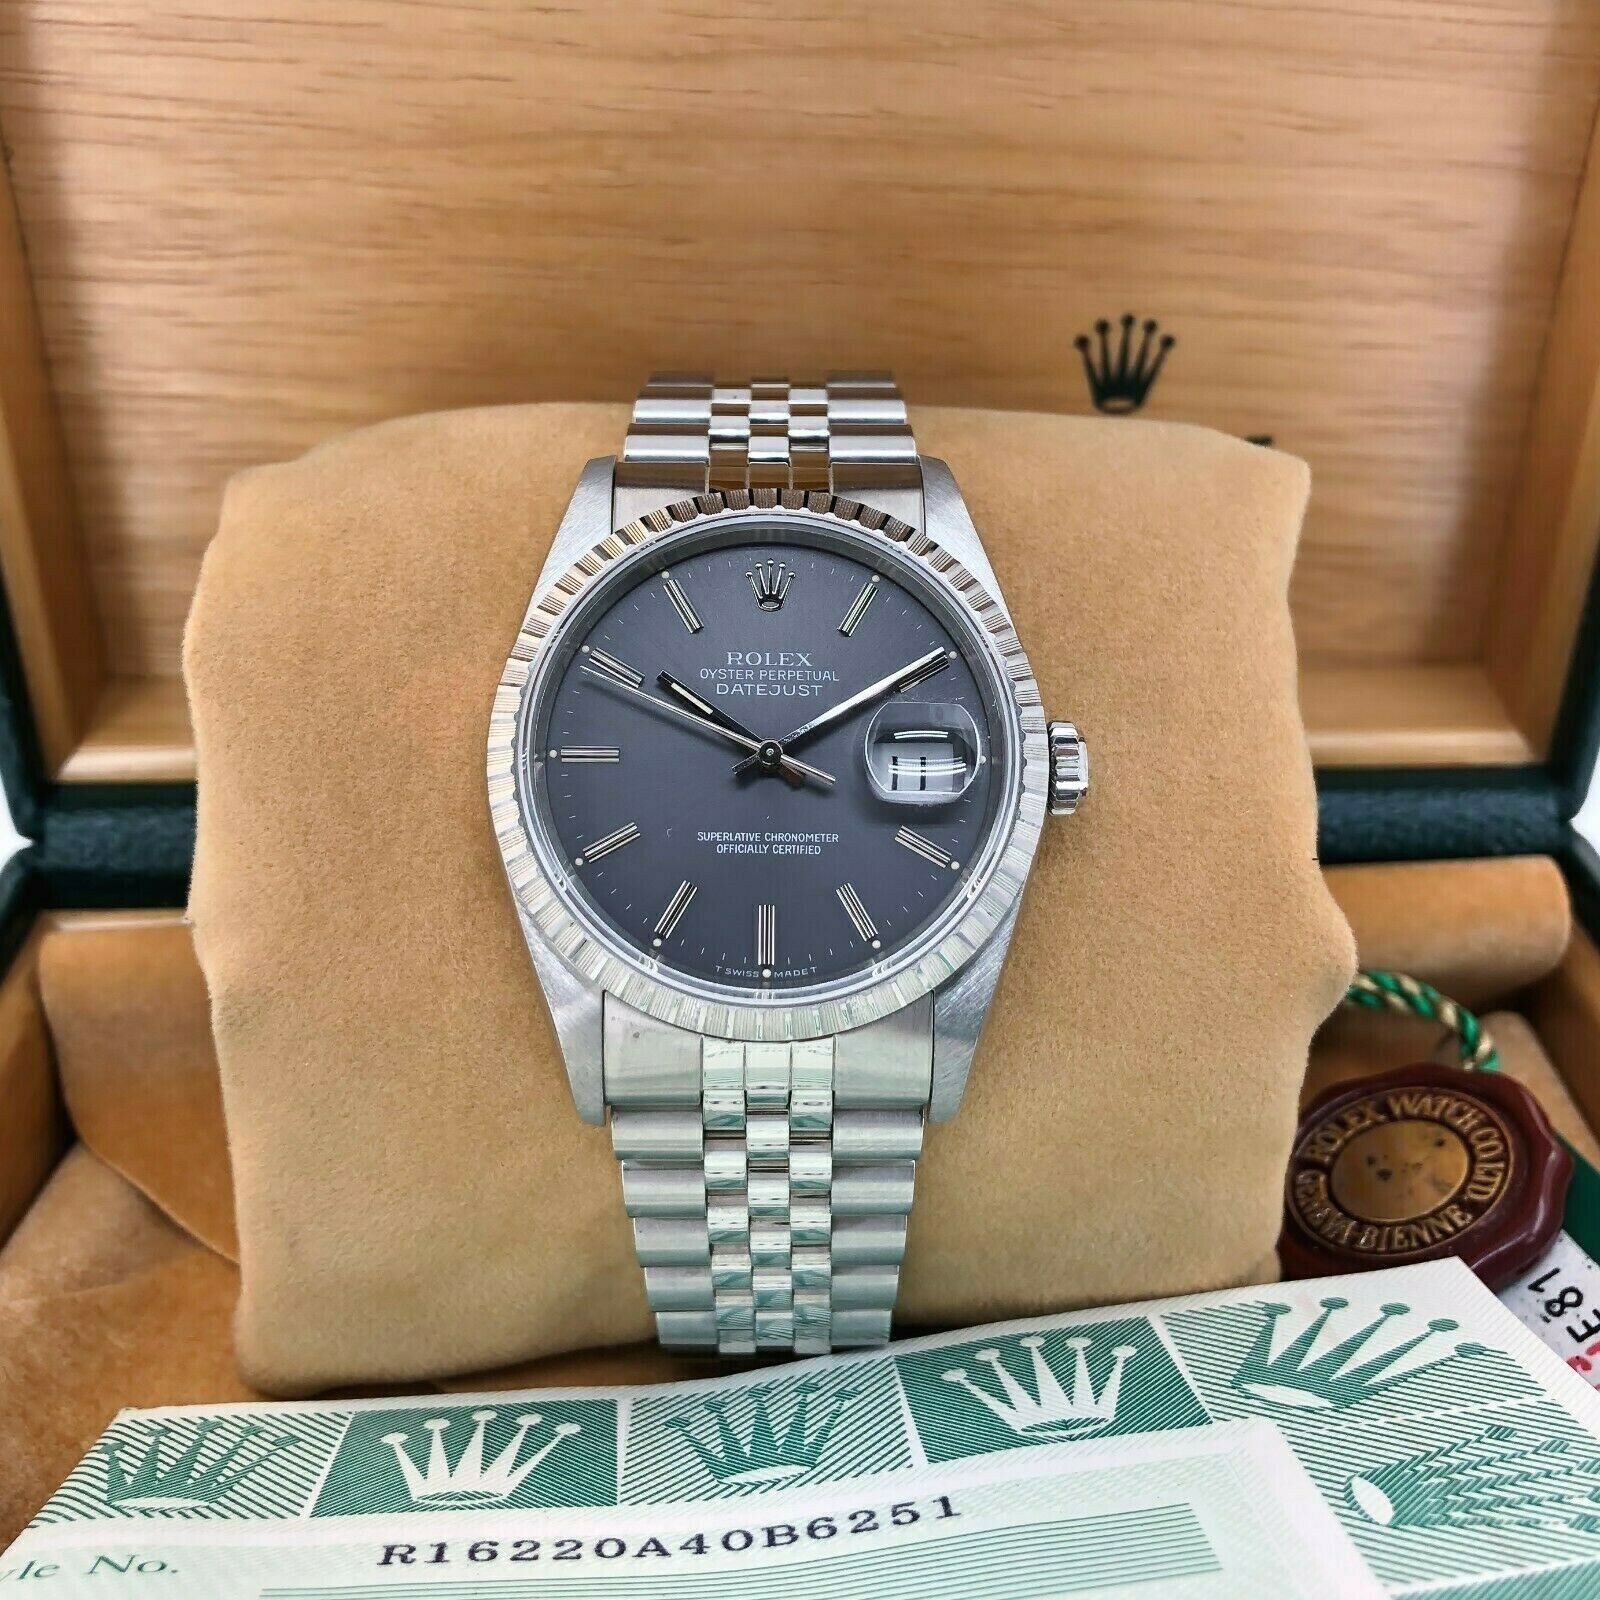 Rolex 36MM Datejust Watch Steel Ref #16220 E Serial Jubilee Band Box and Papers